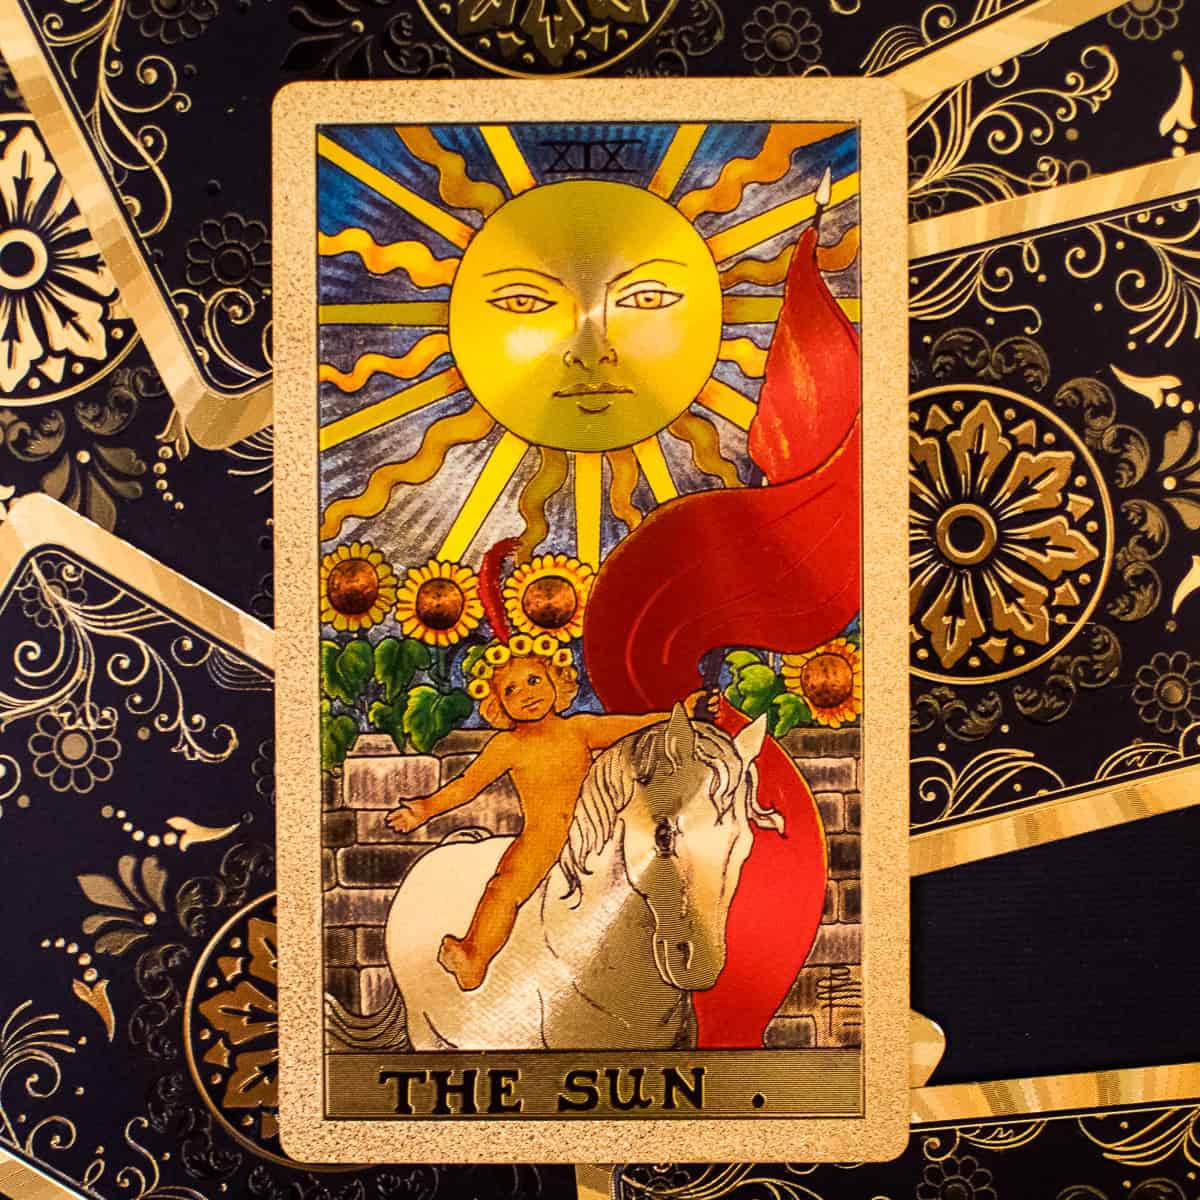 Sun with a face over a child with red cape on a white horse depicted on a tarot card.